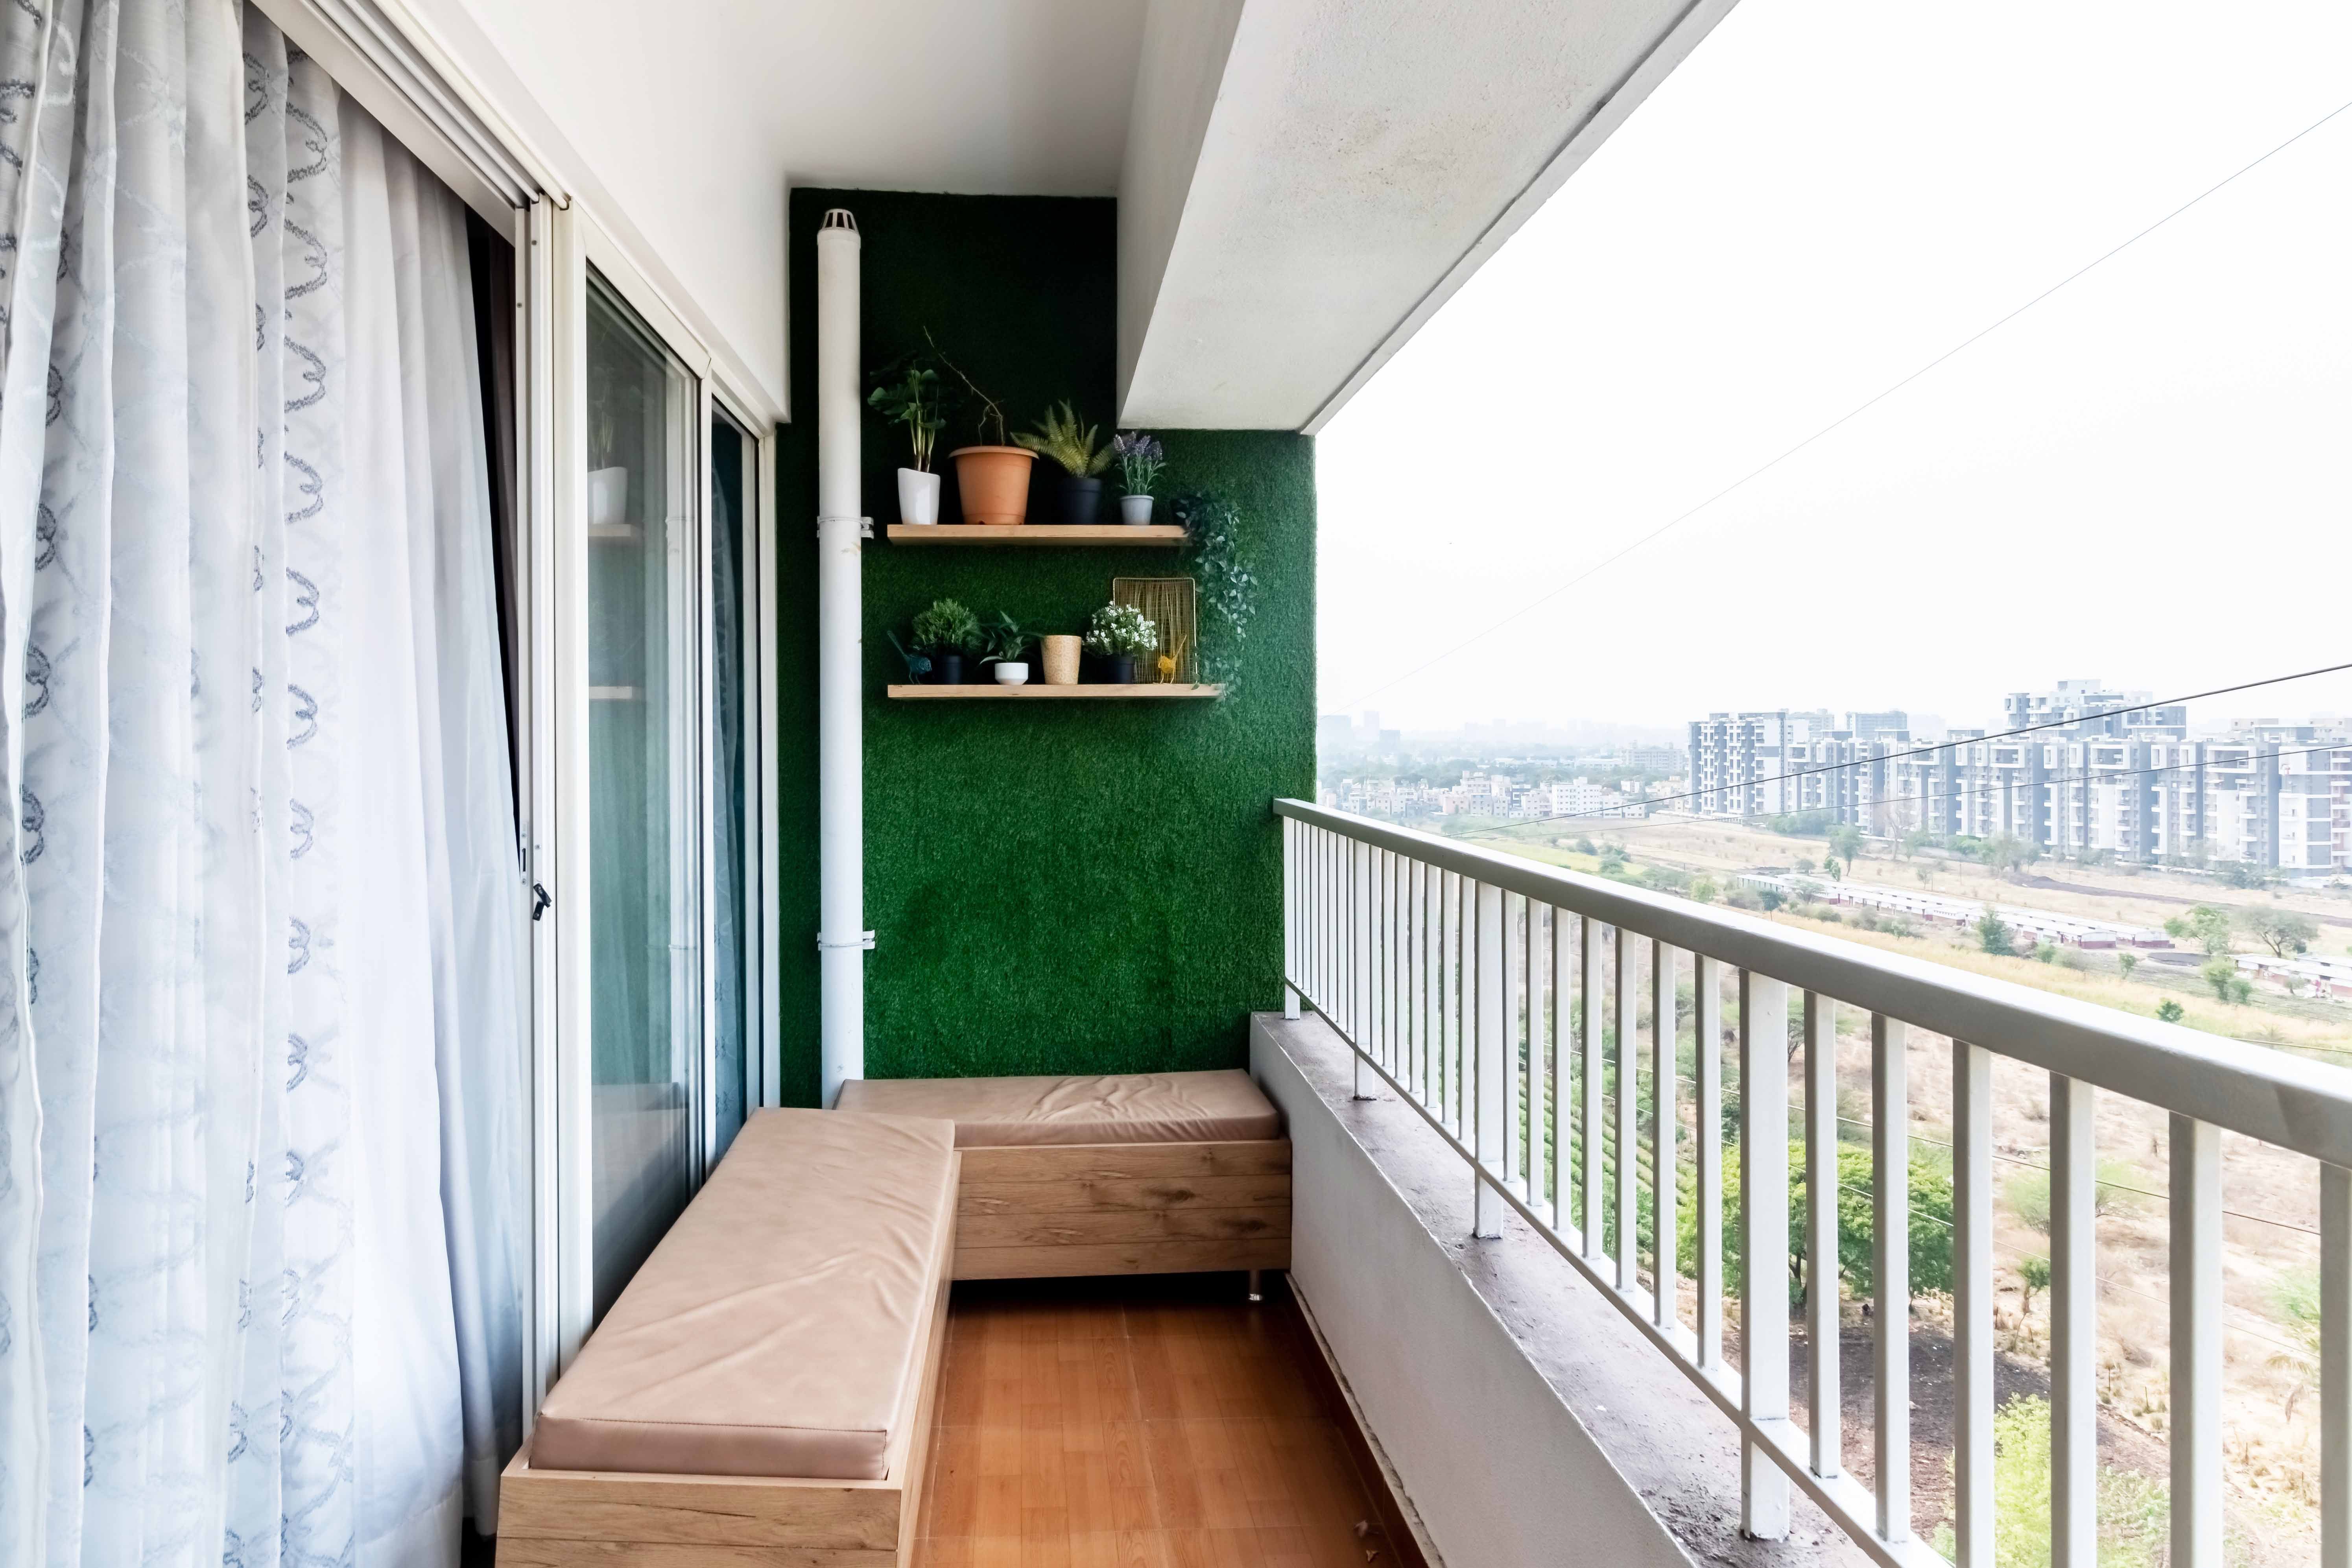 Modern Balcony Design With Grass Wall And L-Shaped Seater